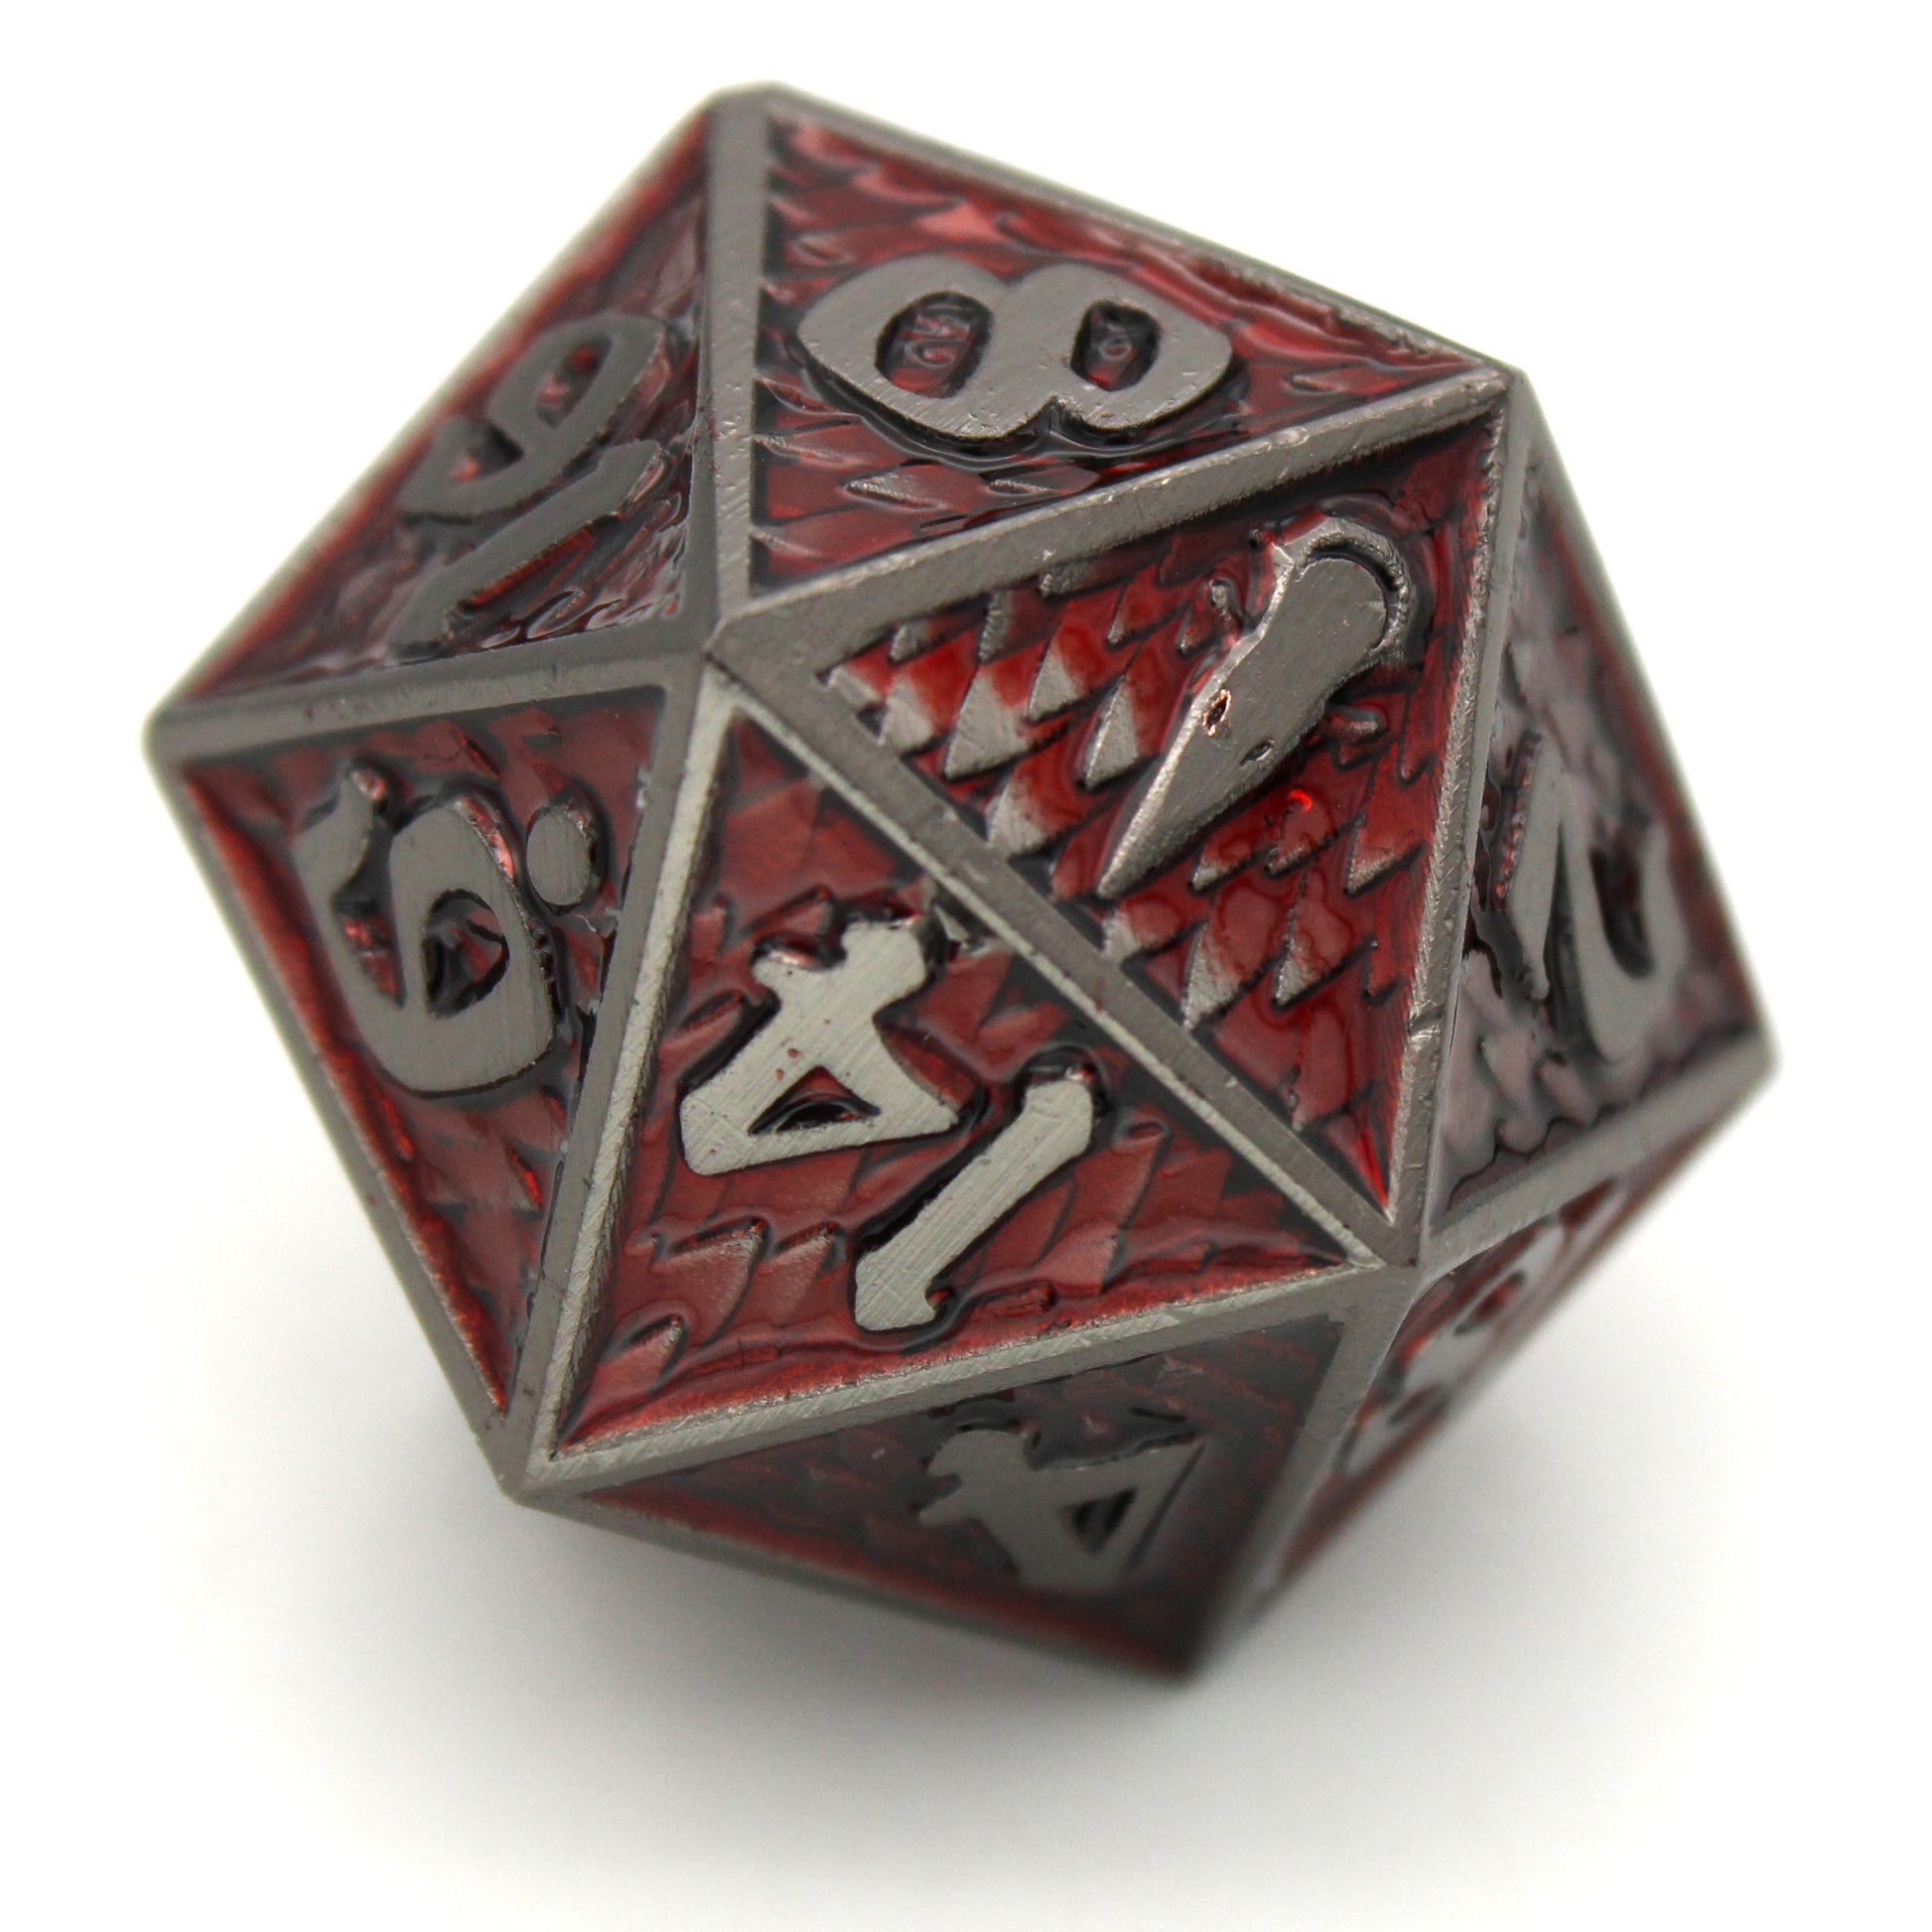 Death Mother is an 8-piece Dice Envy exclusive set of gunmetal dice in our Raven Queen mold, cloaked in blood red ink.